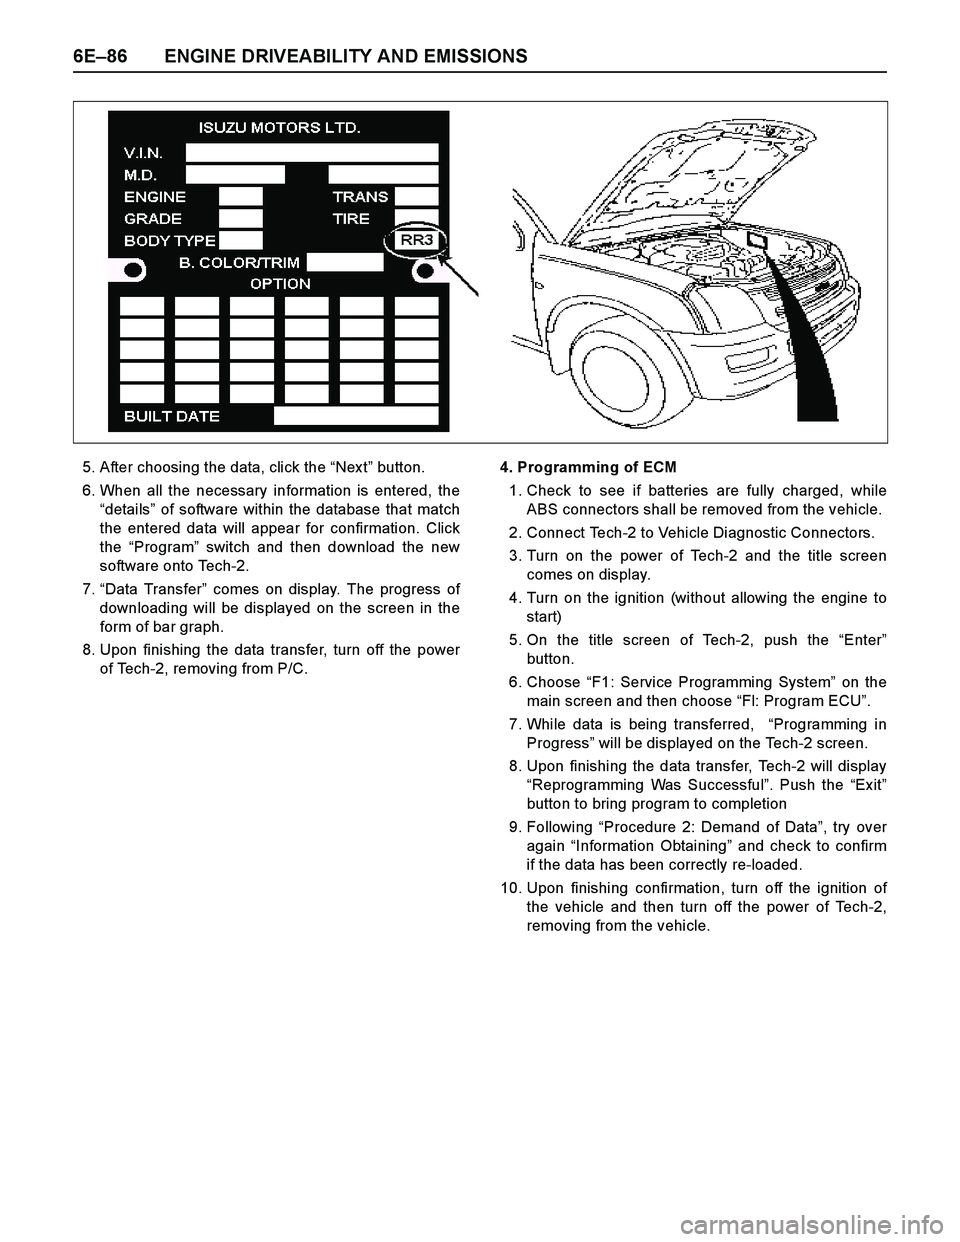 ISUZU TF SERIES 2004  Workshop Manual 6E–86 ENGINE DRIVEABILITY AND EMISSIONS
5. After choosing the data, click the “Nex t” button.
6. When all the necessary information is entered, the
“details” of software within the database 